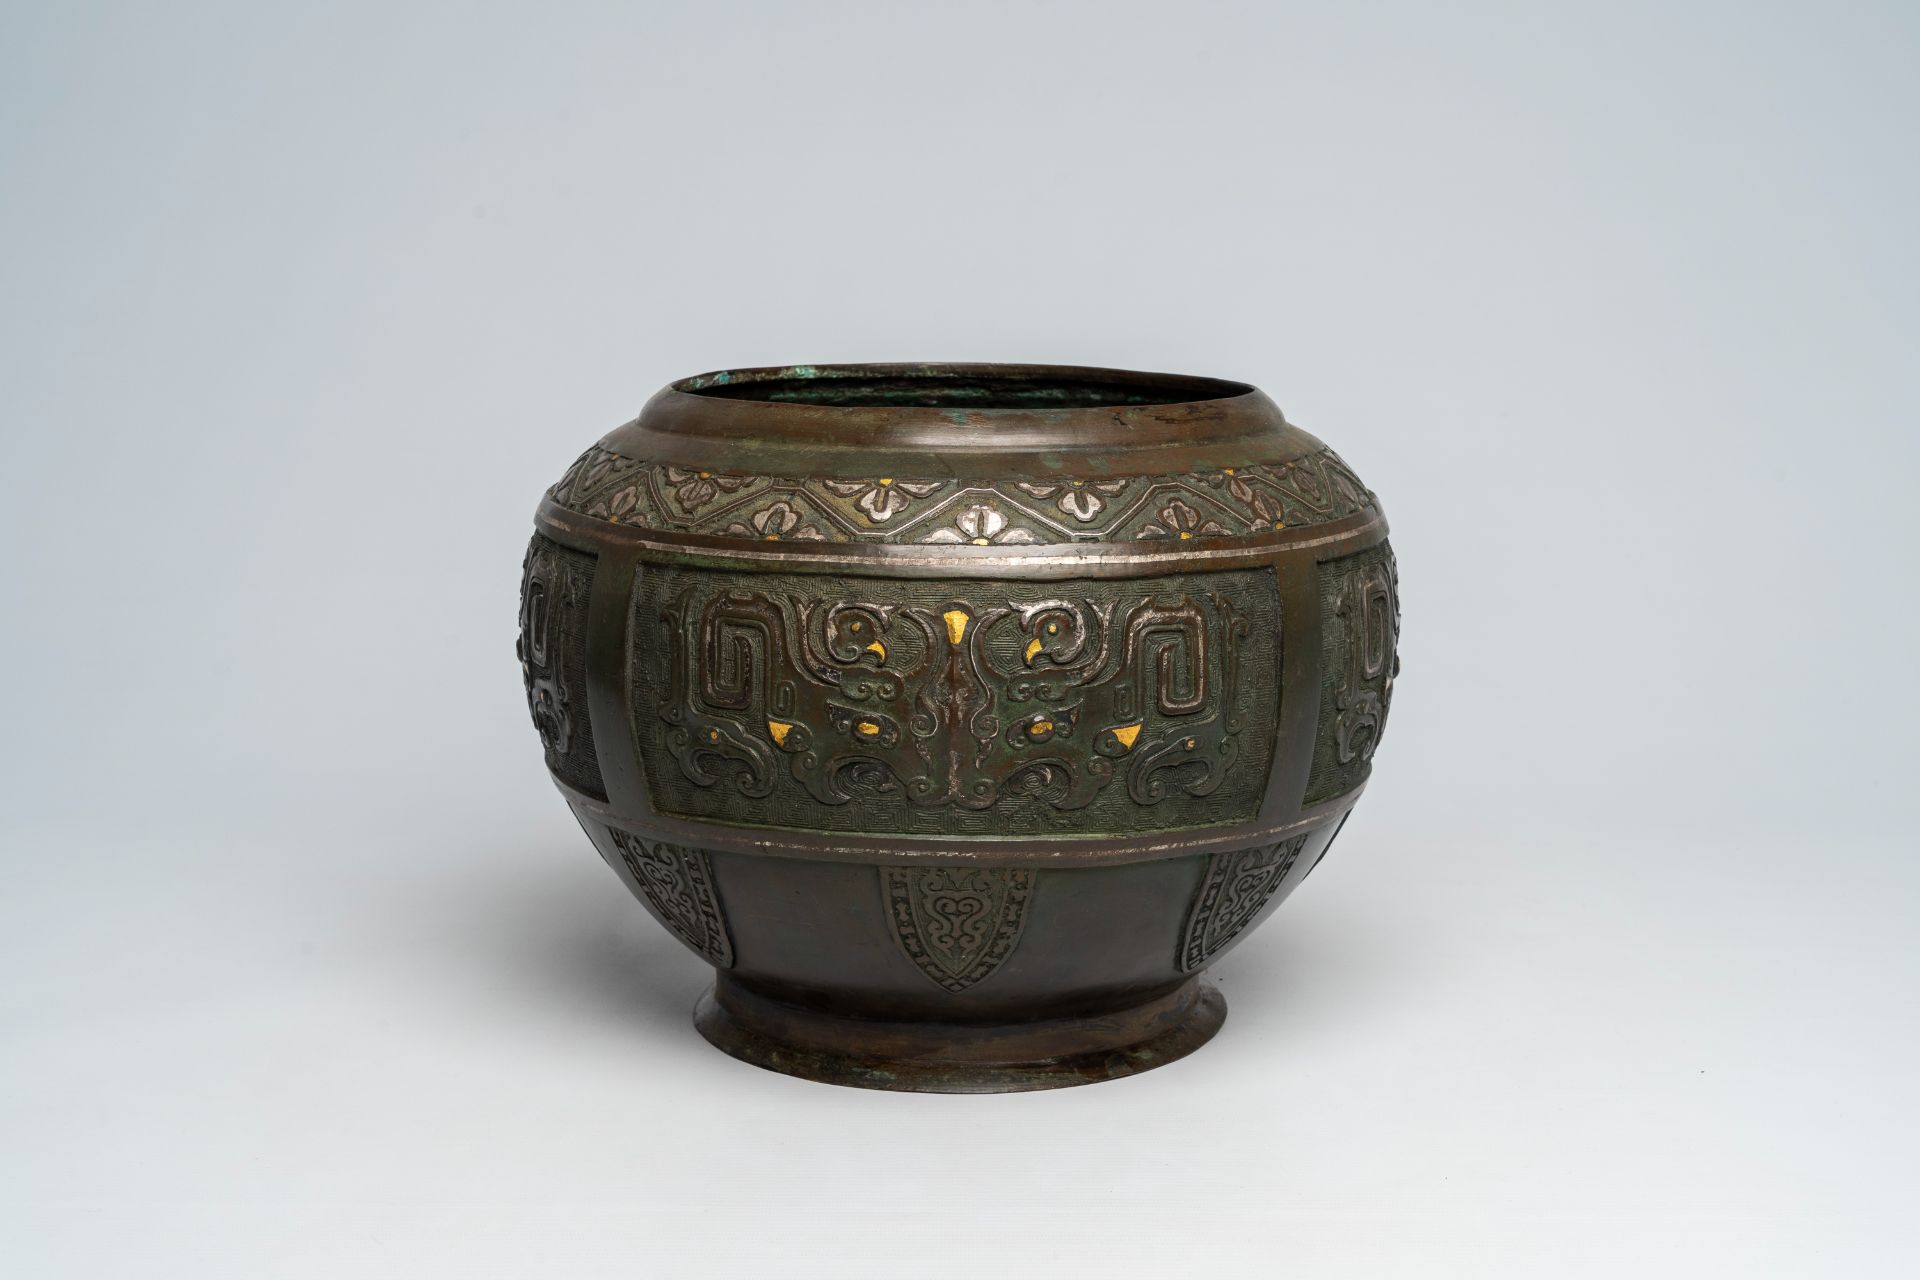 A Chinese gold- and silver-heightened archaic bronze vase, 19th C.